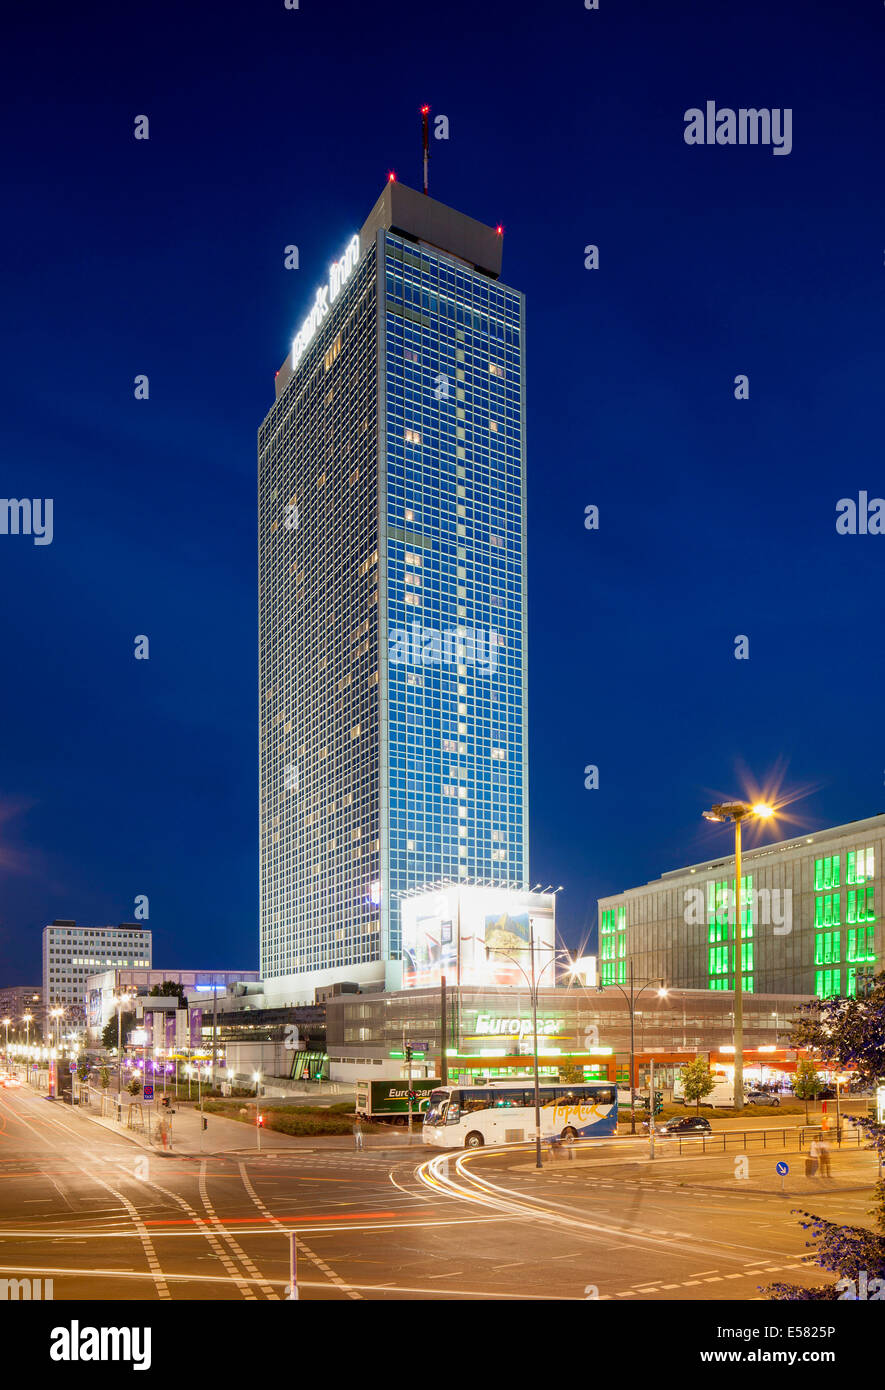 Former Inter Hotel, later Forum Hotel and Park Inn by Radisson, Alexanderplatz square, Mitte district, Berlin, Germany Stock Photo